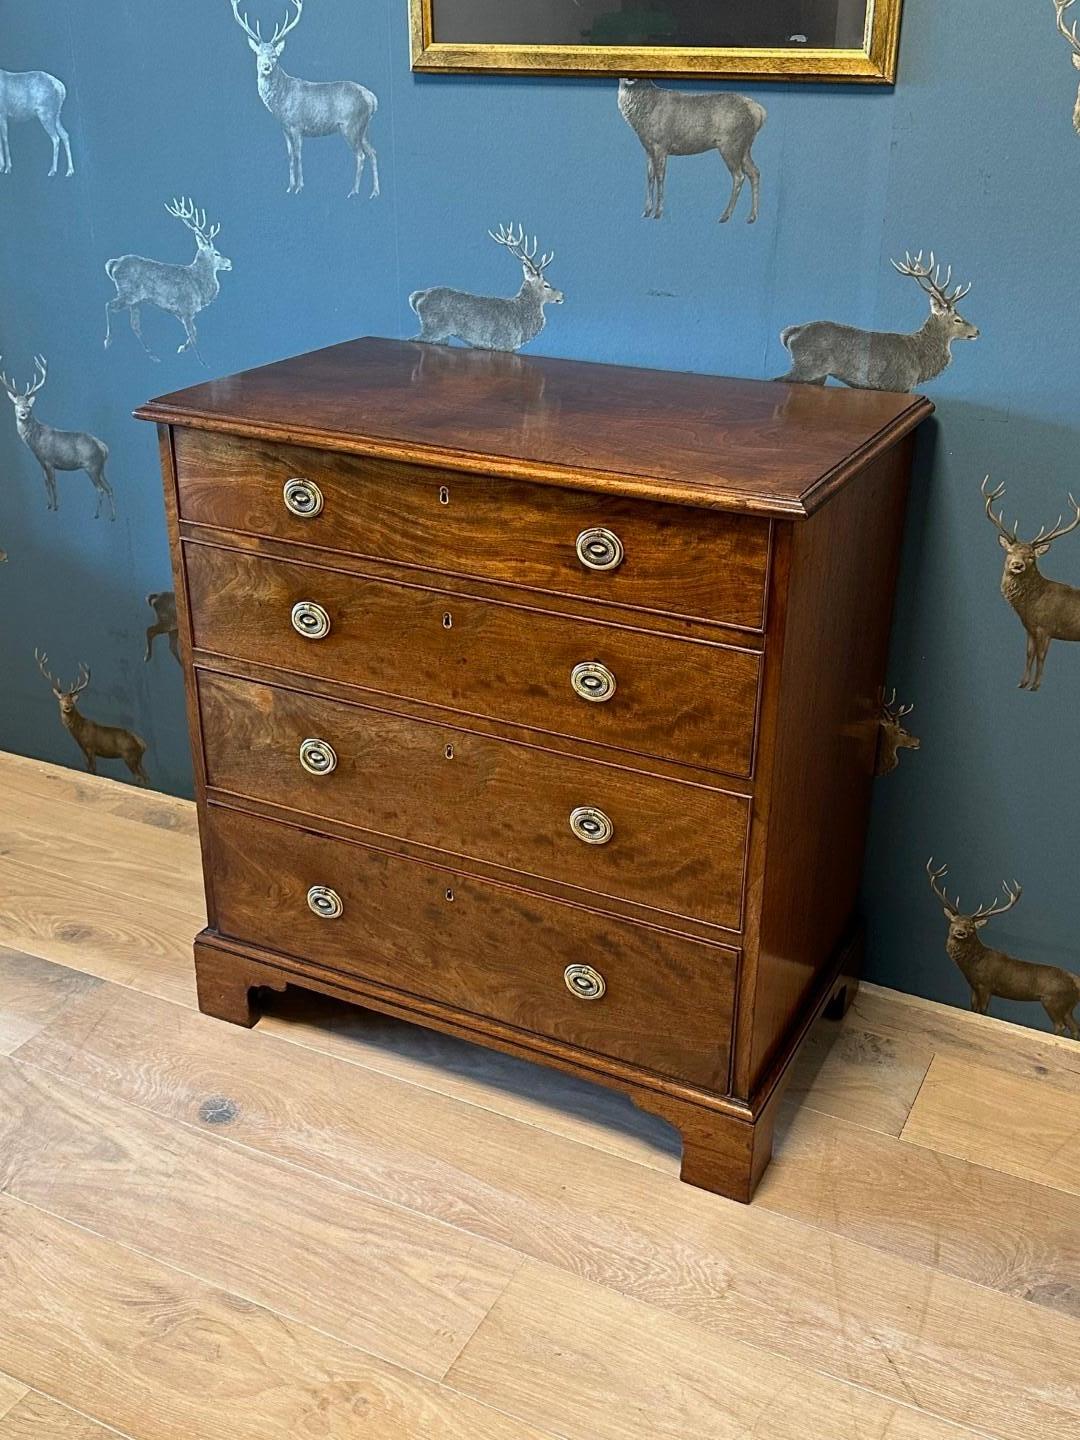 Beautiful small antique mahogany chest of drawers with 4 drawers in perfect condition. The chest of drawers has a beautiful aged patina.
Origin: England
Period: Approx. 1840
Size: 76cm x 45cm x h.84cm